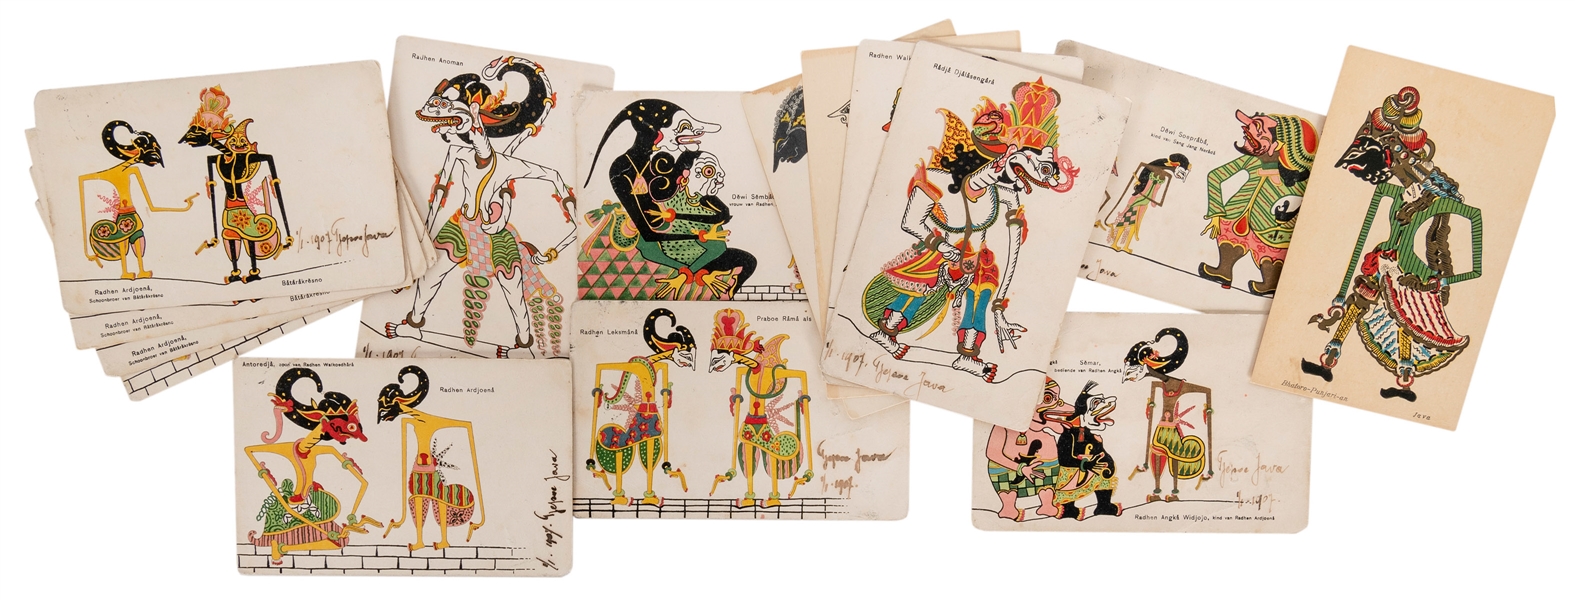  [PUPPETRY]. Pre 1910 Java Postcard Collection. Vintage coll...